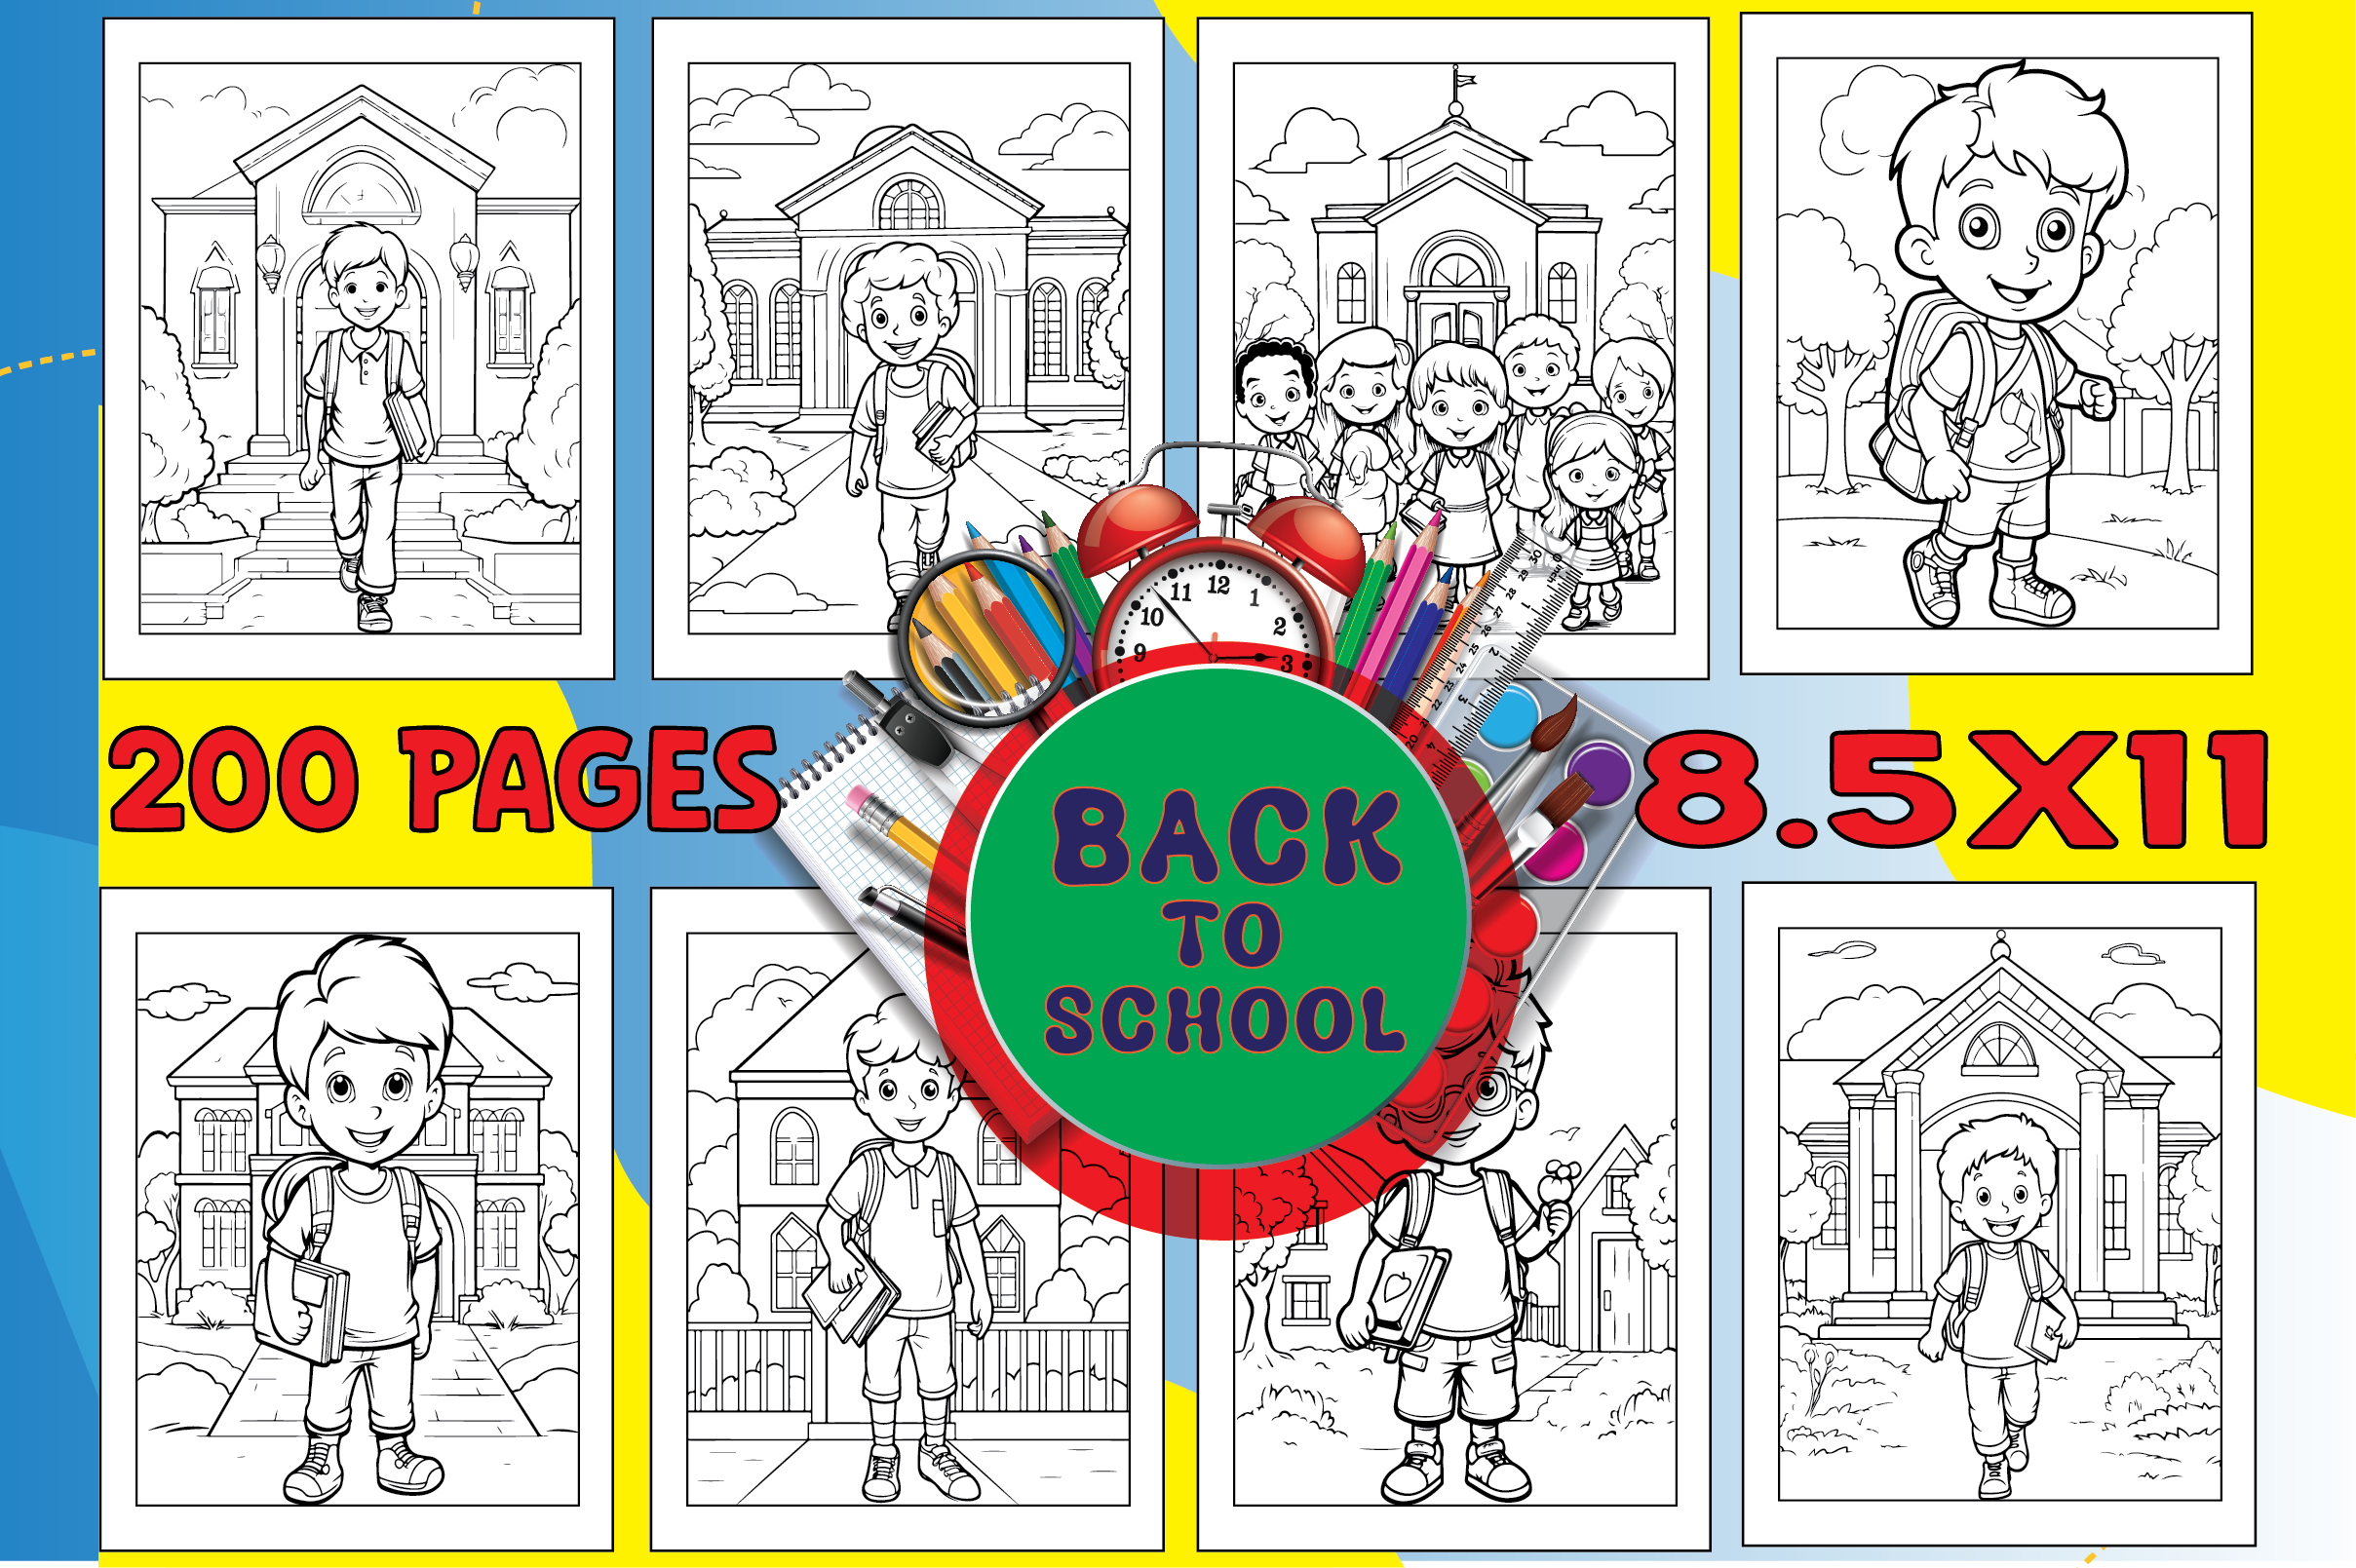 back-to-school-coloring-pages-for-kids-graphic-by-craftmaker-creative